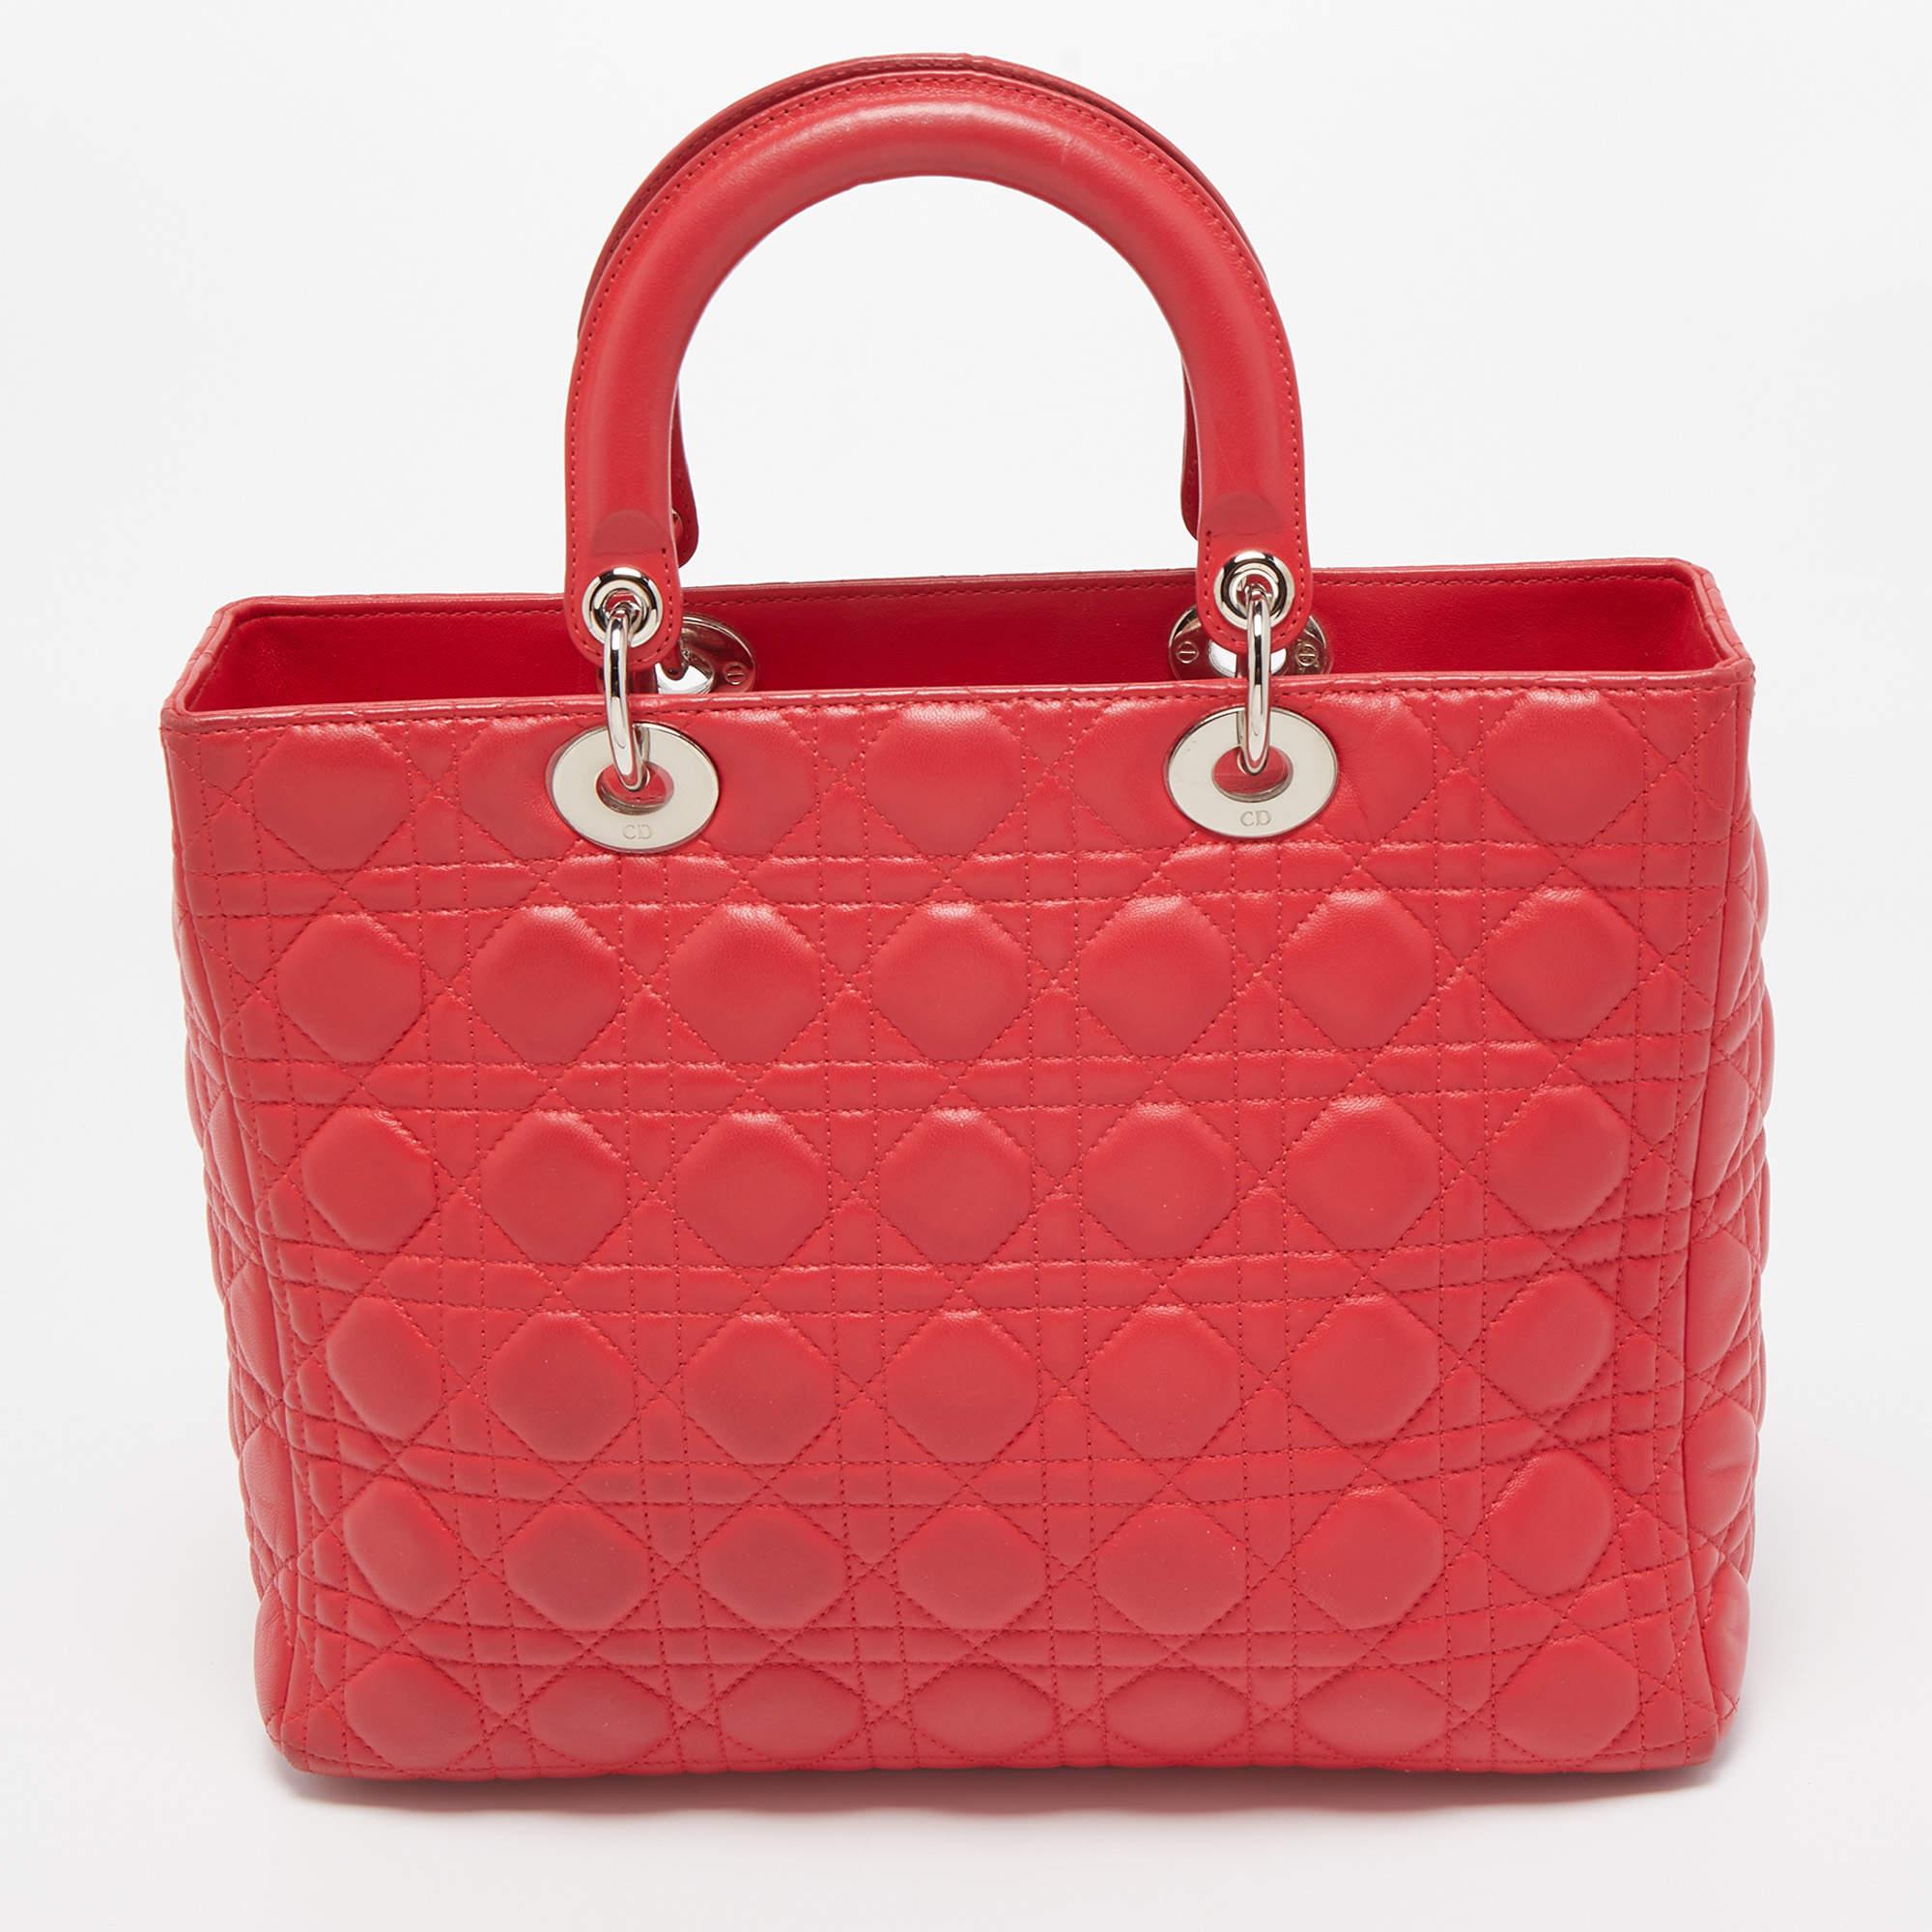 A timeless status and great design mark the Lady Dior tote. It is an iconic bag that people continue to invest in to this day. We have here this classic beauty crafted from pink Cannage leather. The bag has a lined interior for your essentials. This